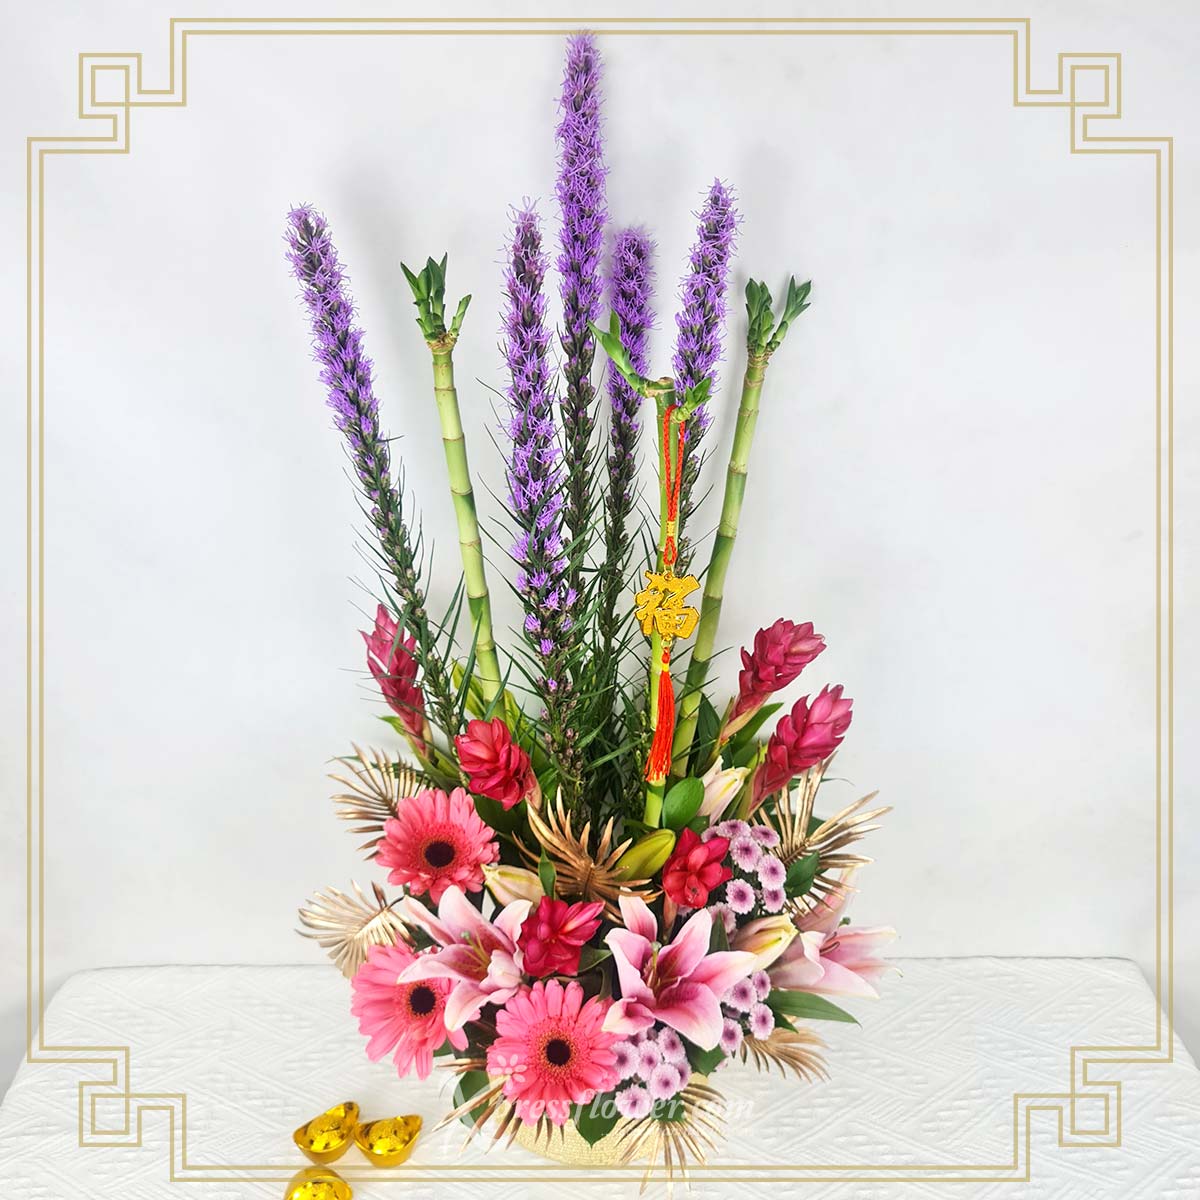 CNY Flowers Lucky Bamboo Pink Lilies and Gerberas with Red Ginger and Purple Liatris_1B